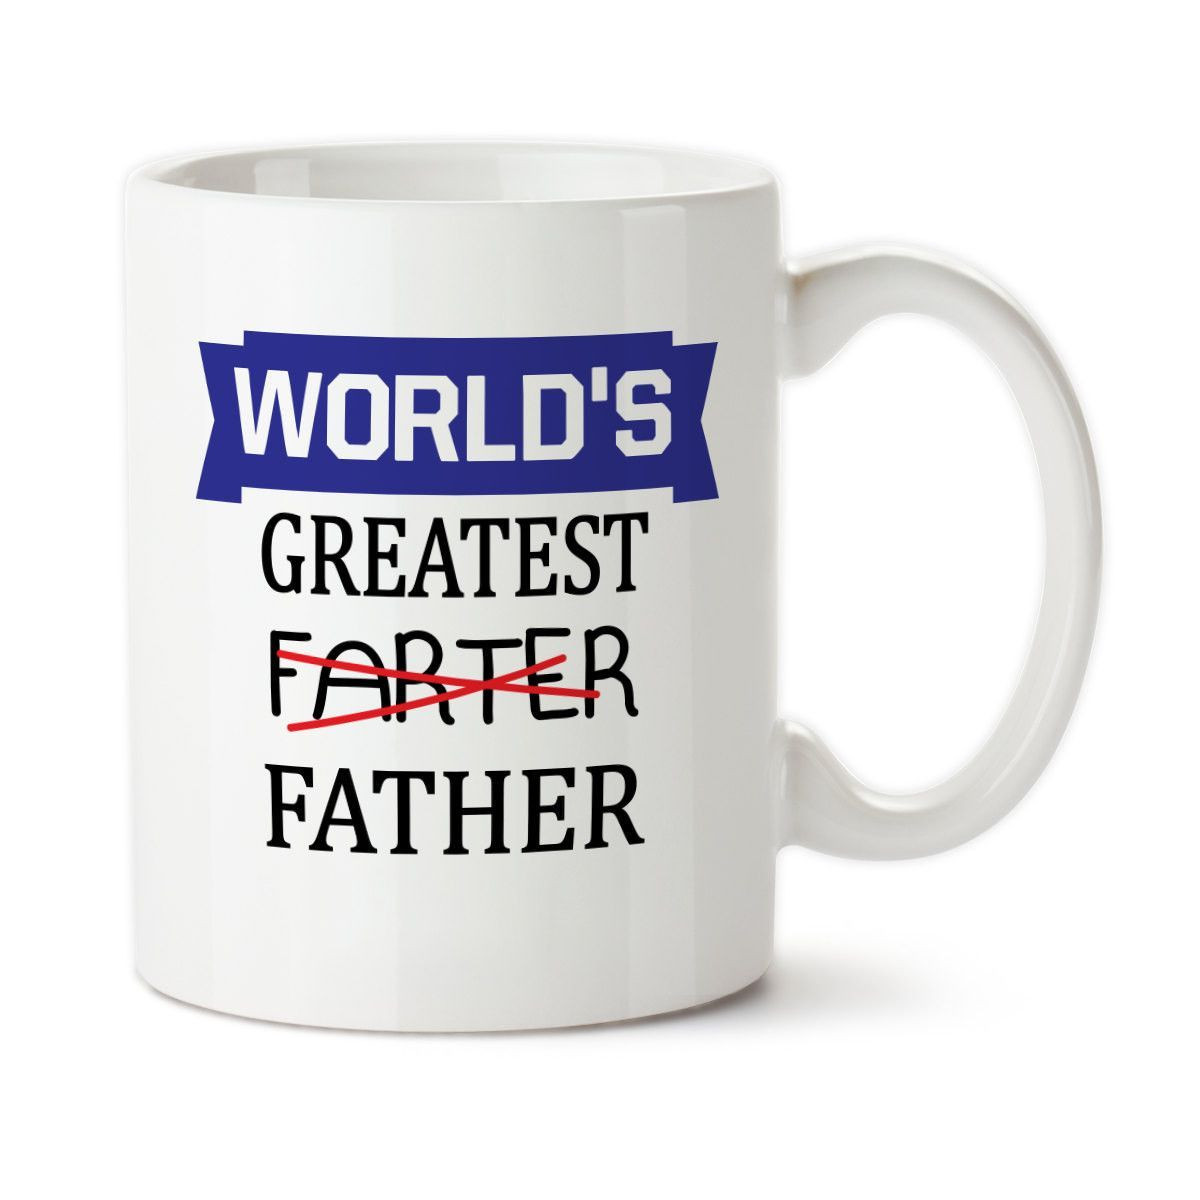 Good Dad Birthday Gifts
 World s Greatest Farter Father Funny mug Father s Day